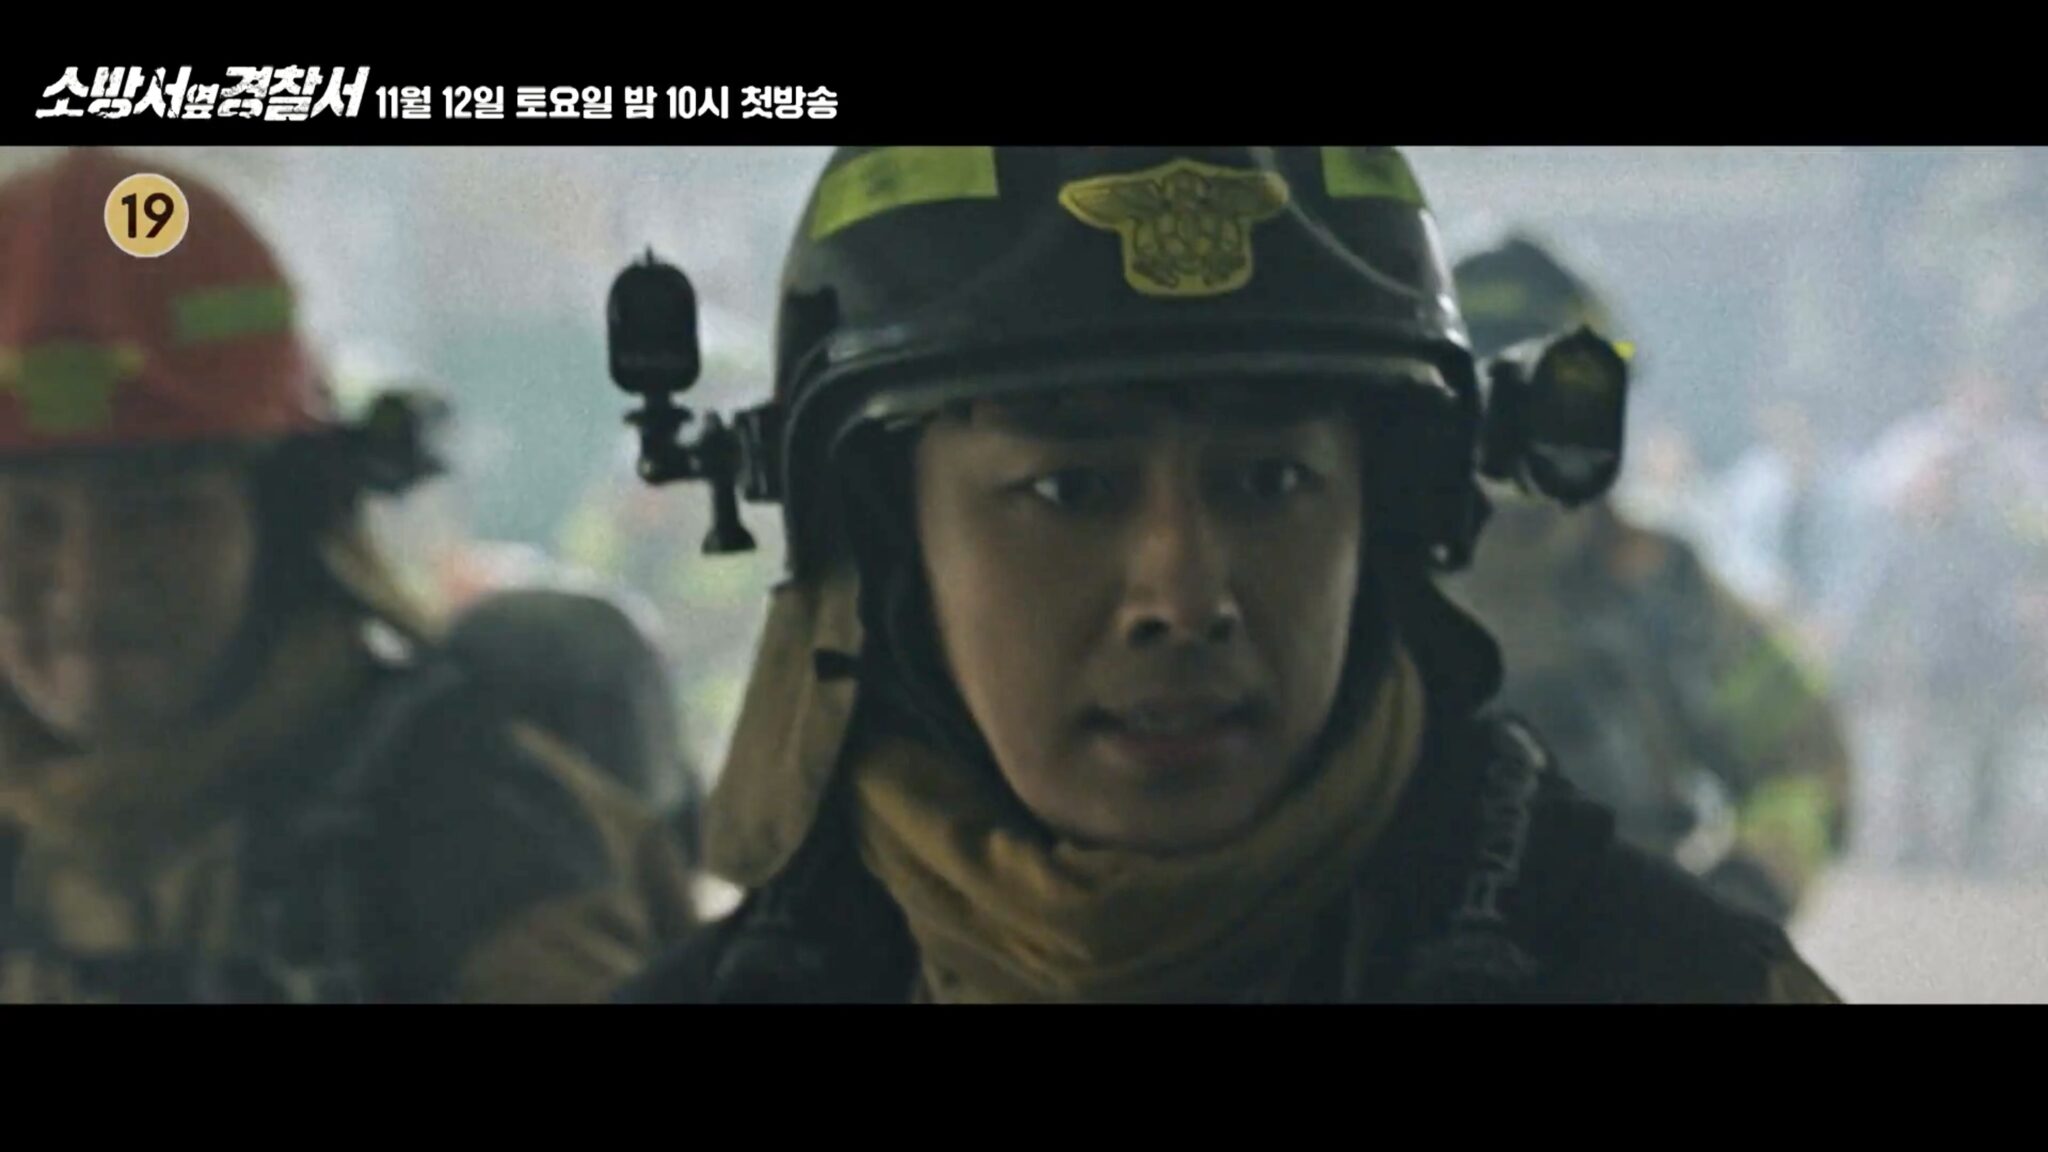 Kim Rae-won, Sohn Ho-joon, and Gong Seung-yeon are The First Responders